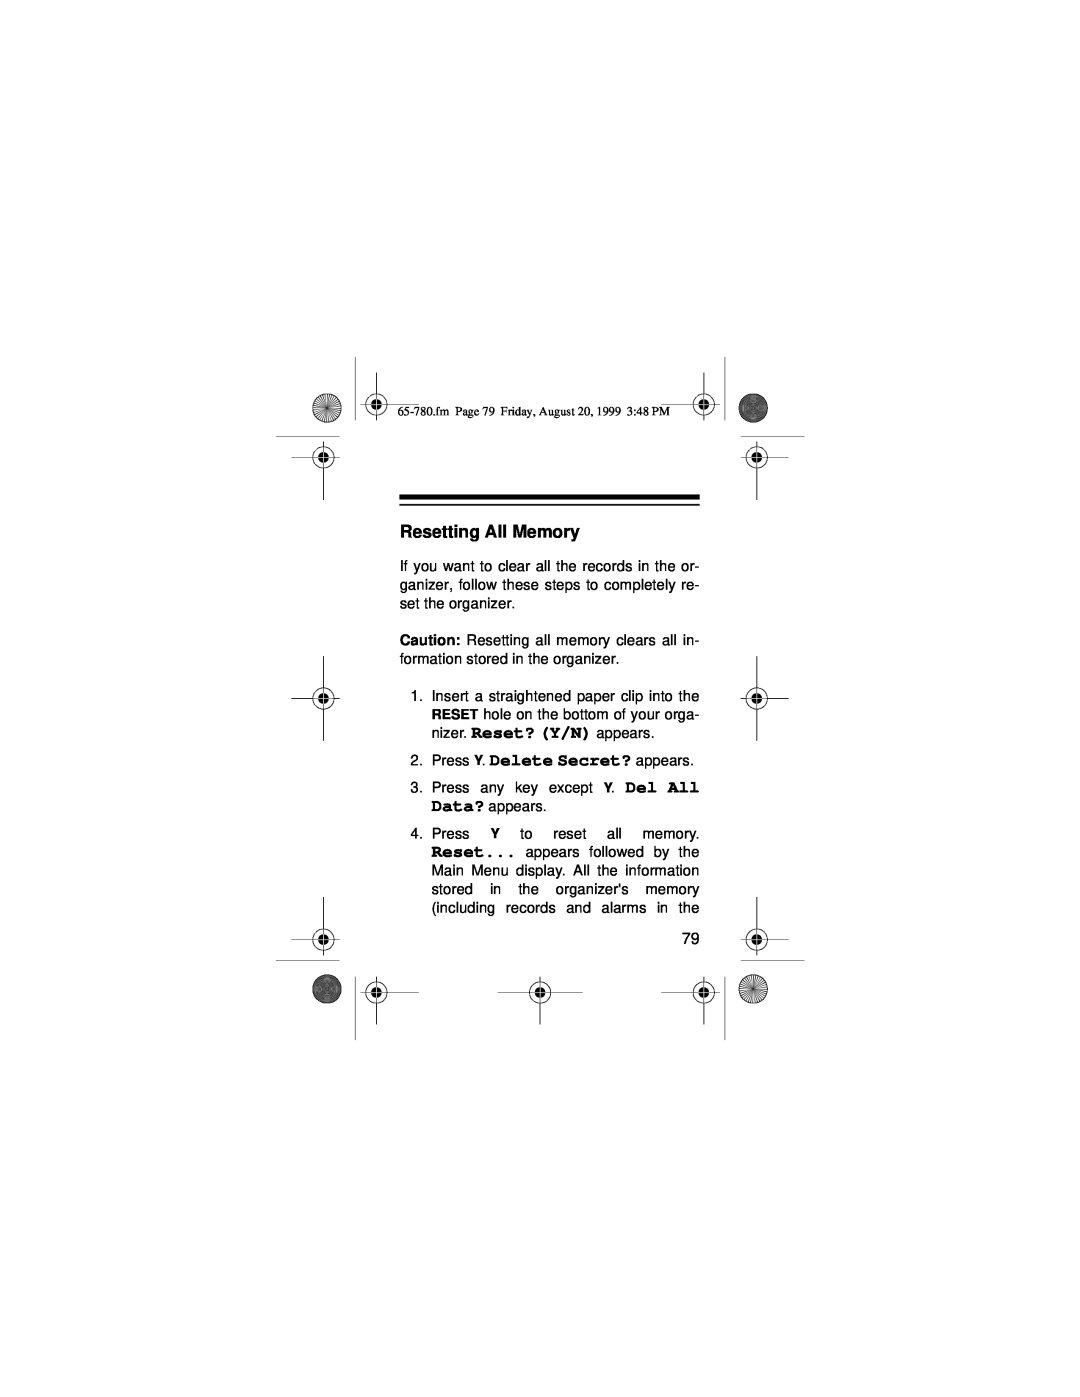 Samsung 256K owner manual Resetting All Memory, fm Page 79 Friday, August 20, 1999 348 PM 